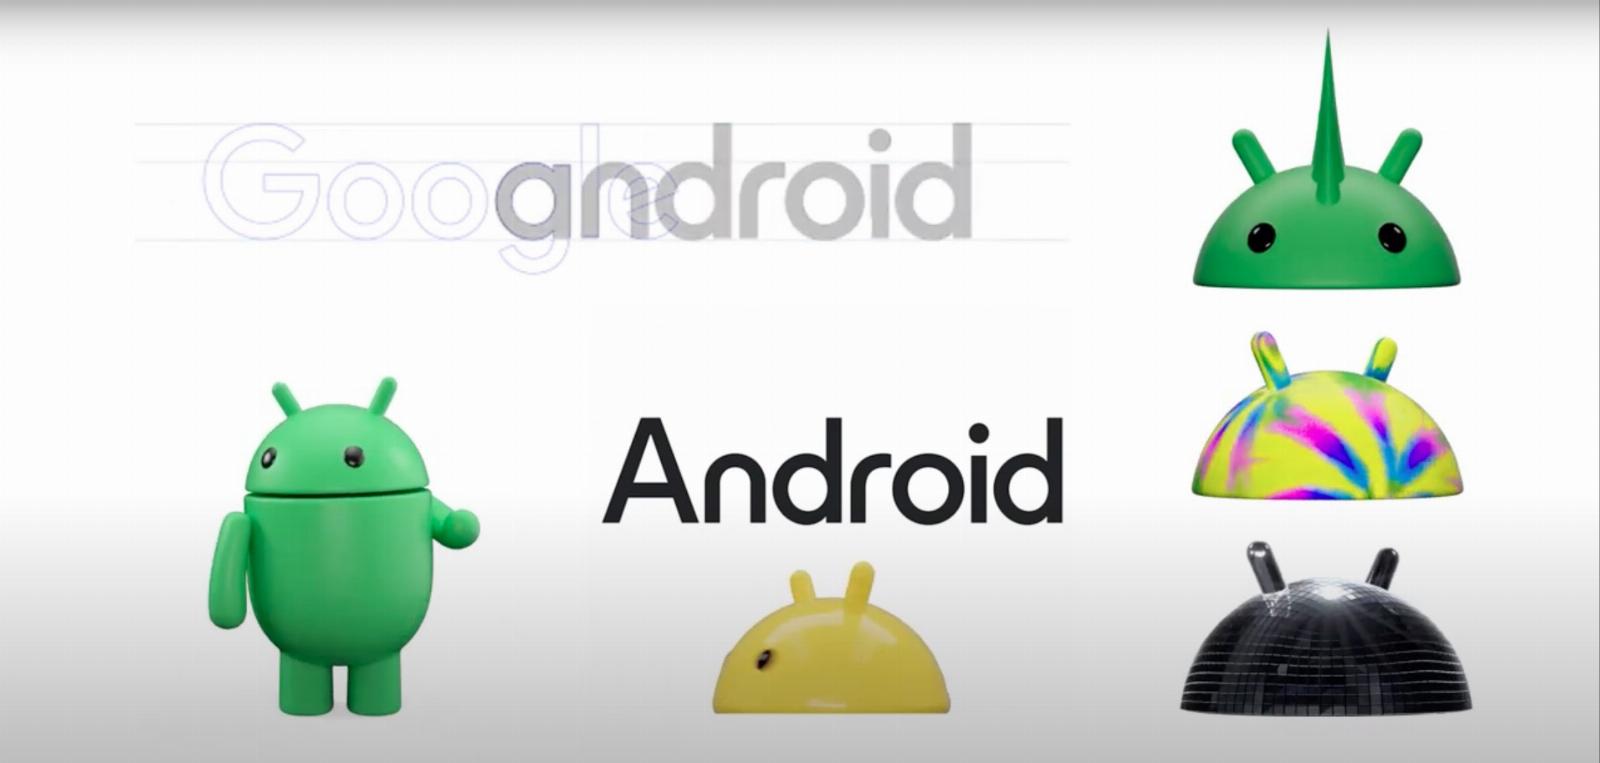 Google is changing Android branding with a 3D logo